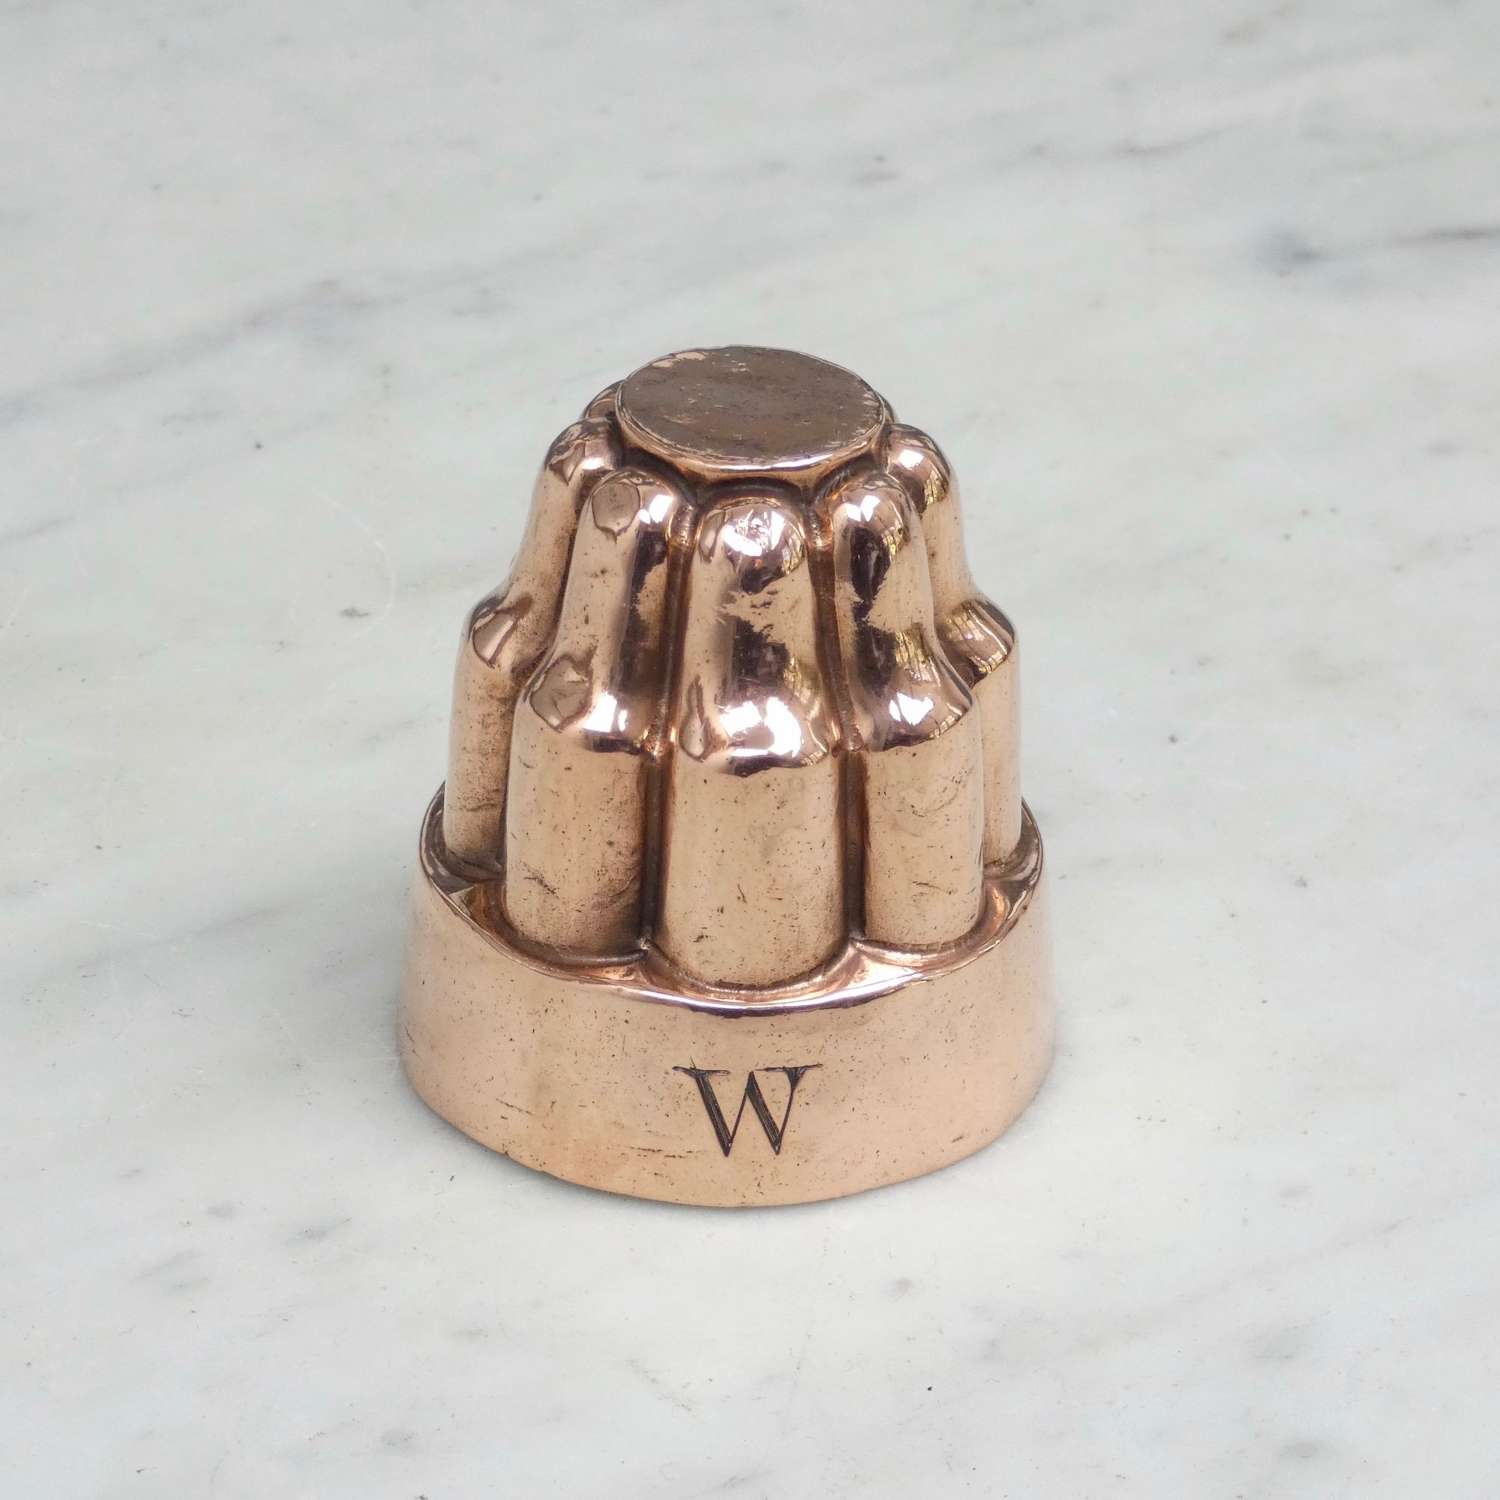 Copper mould with engraved 'W'